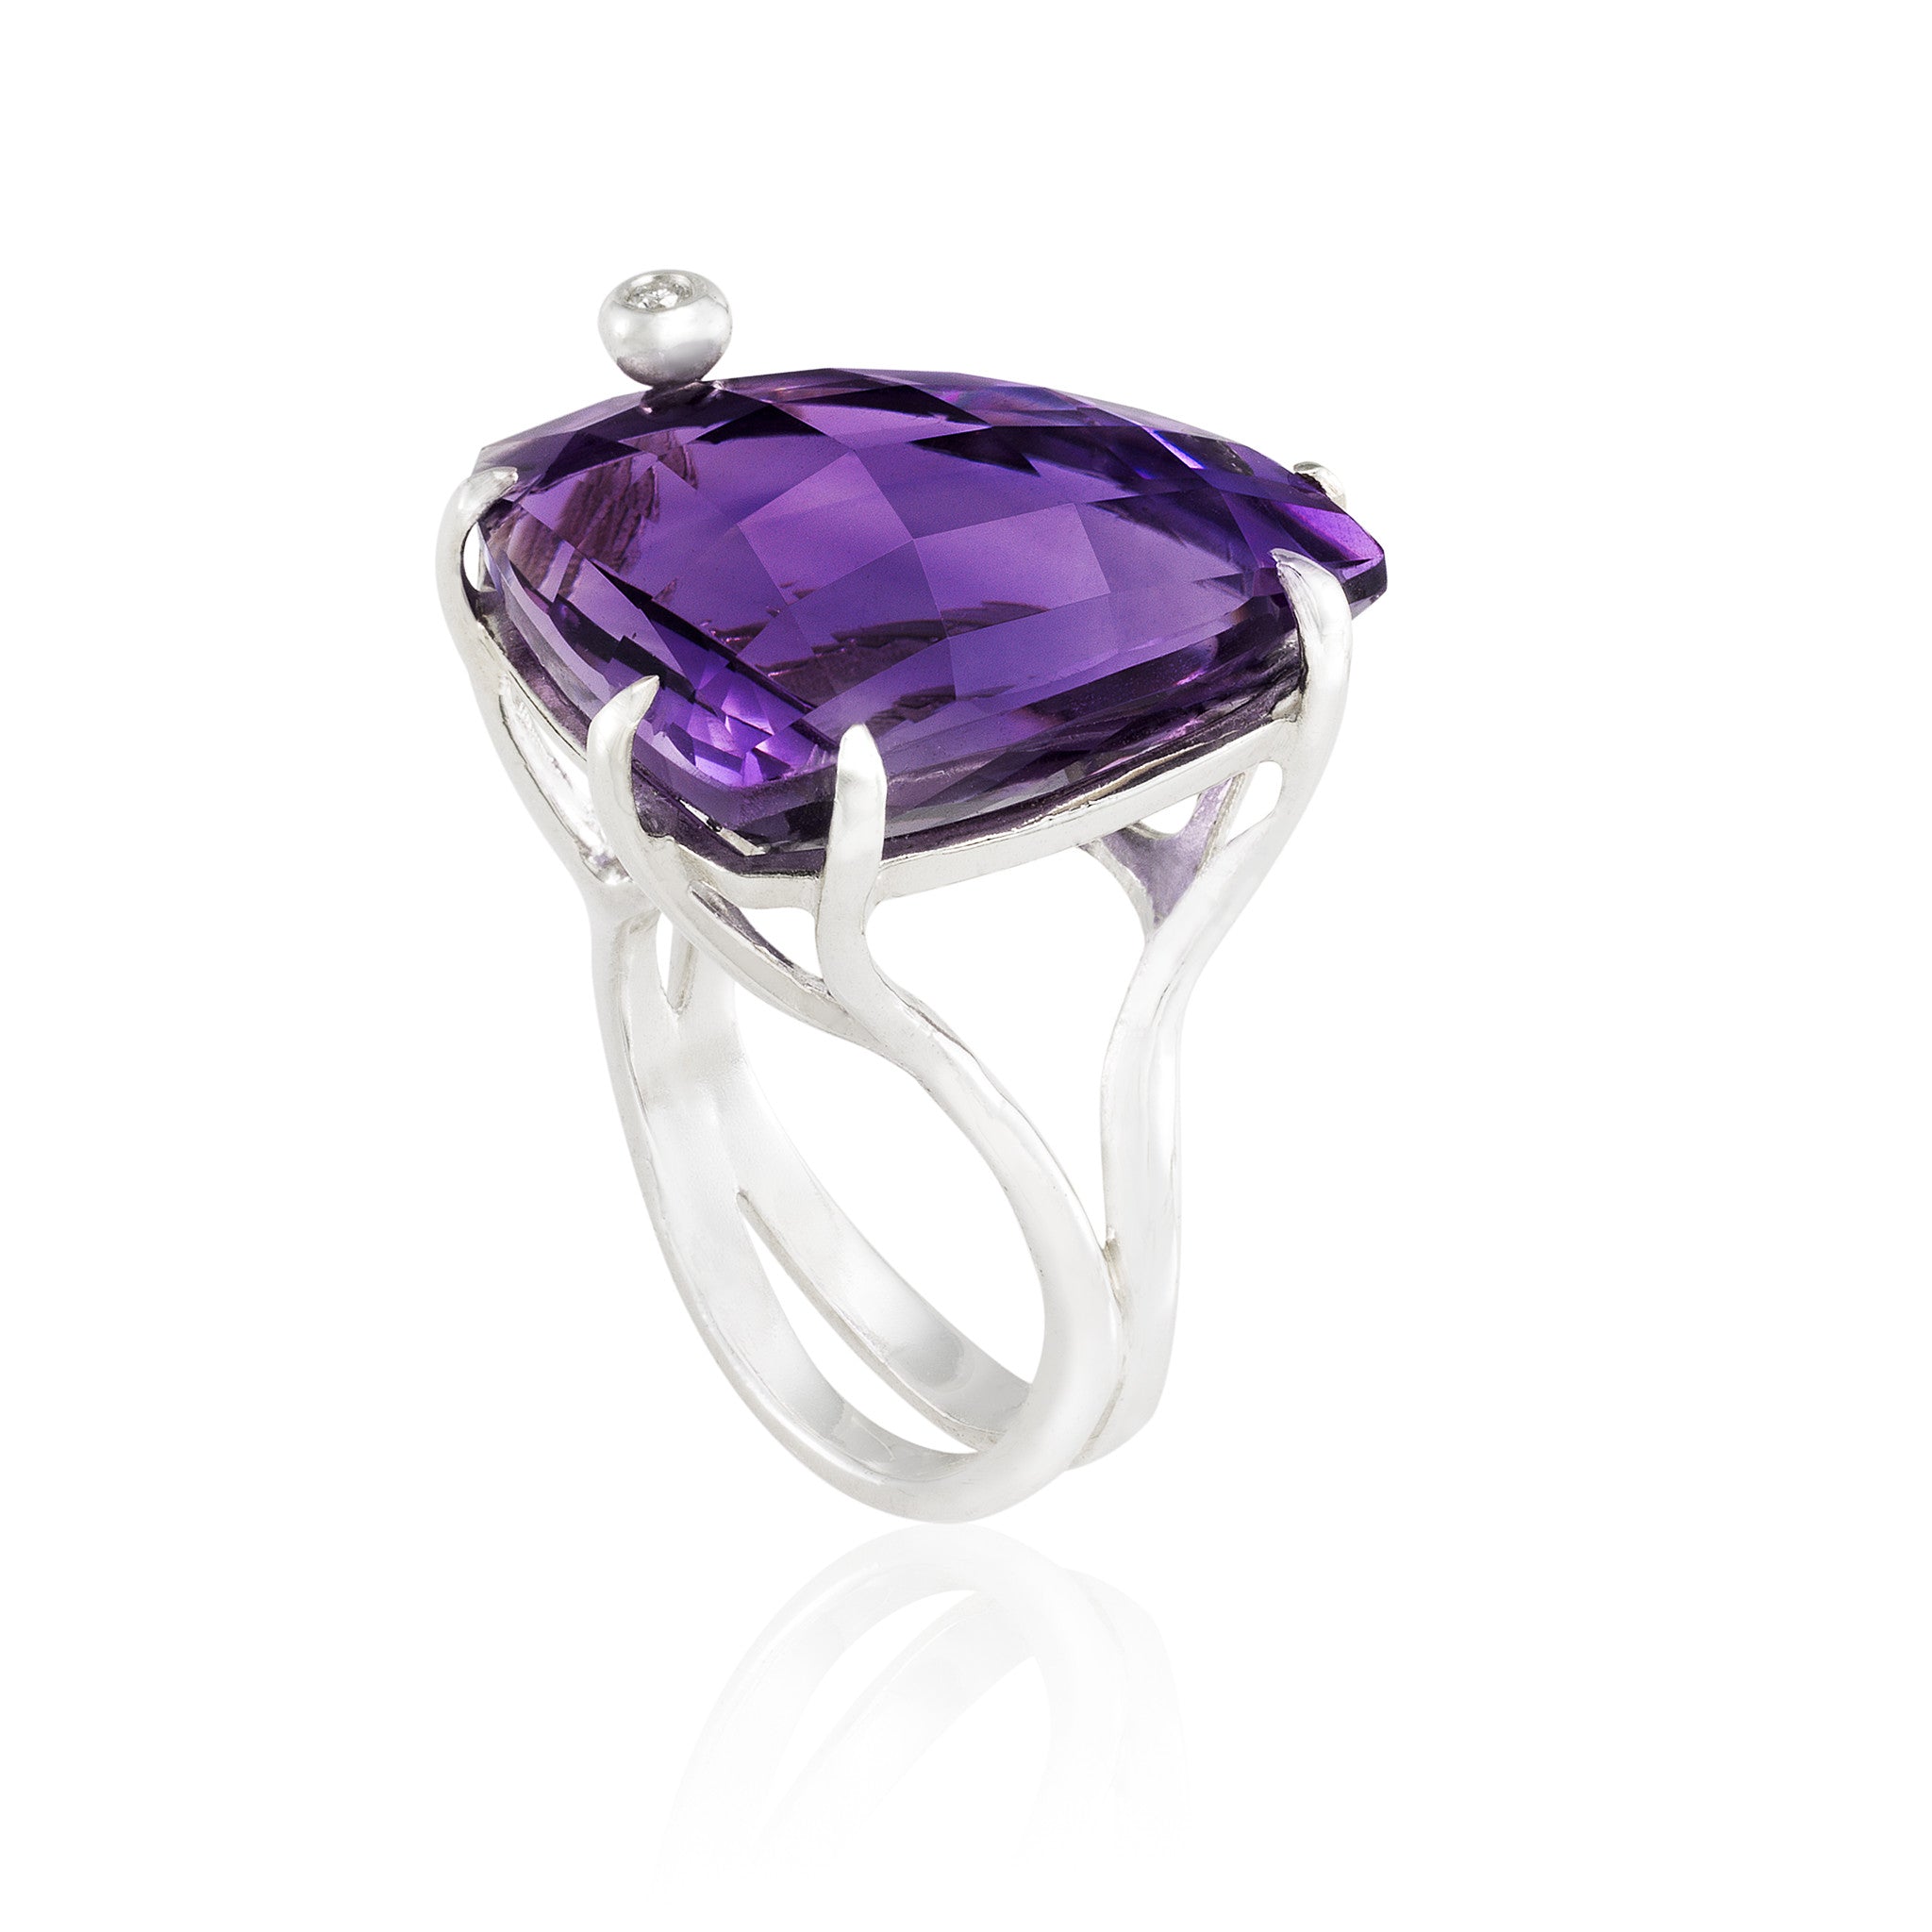 Triangle Cocktail Ring: Amethyst